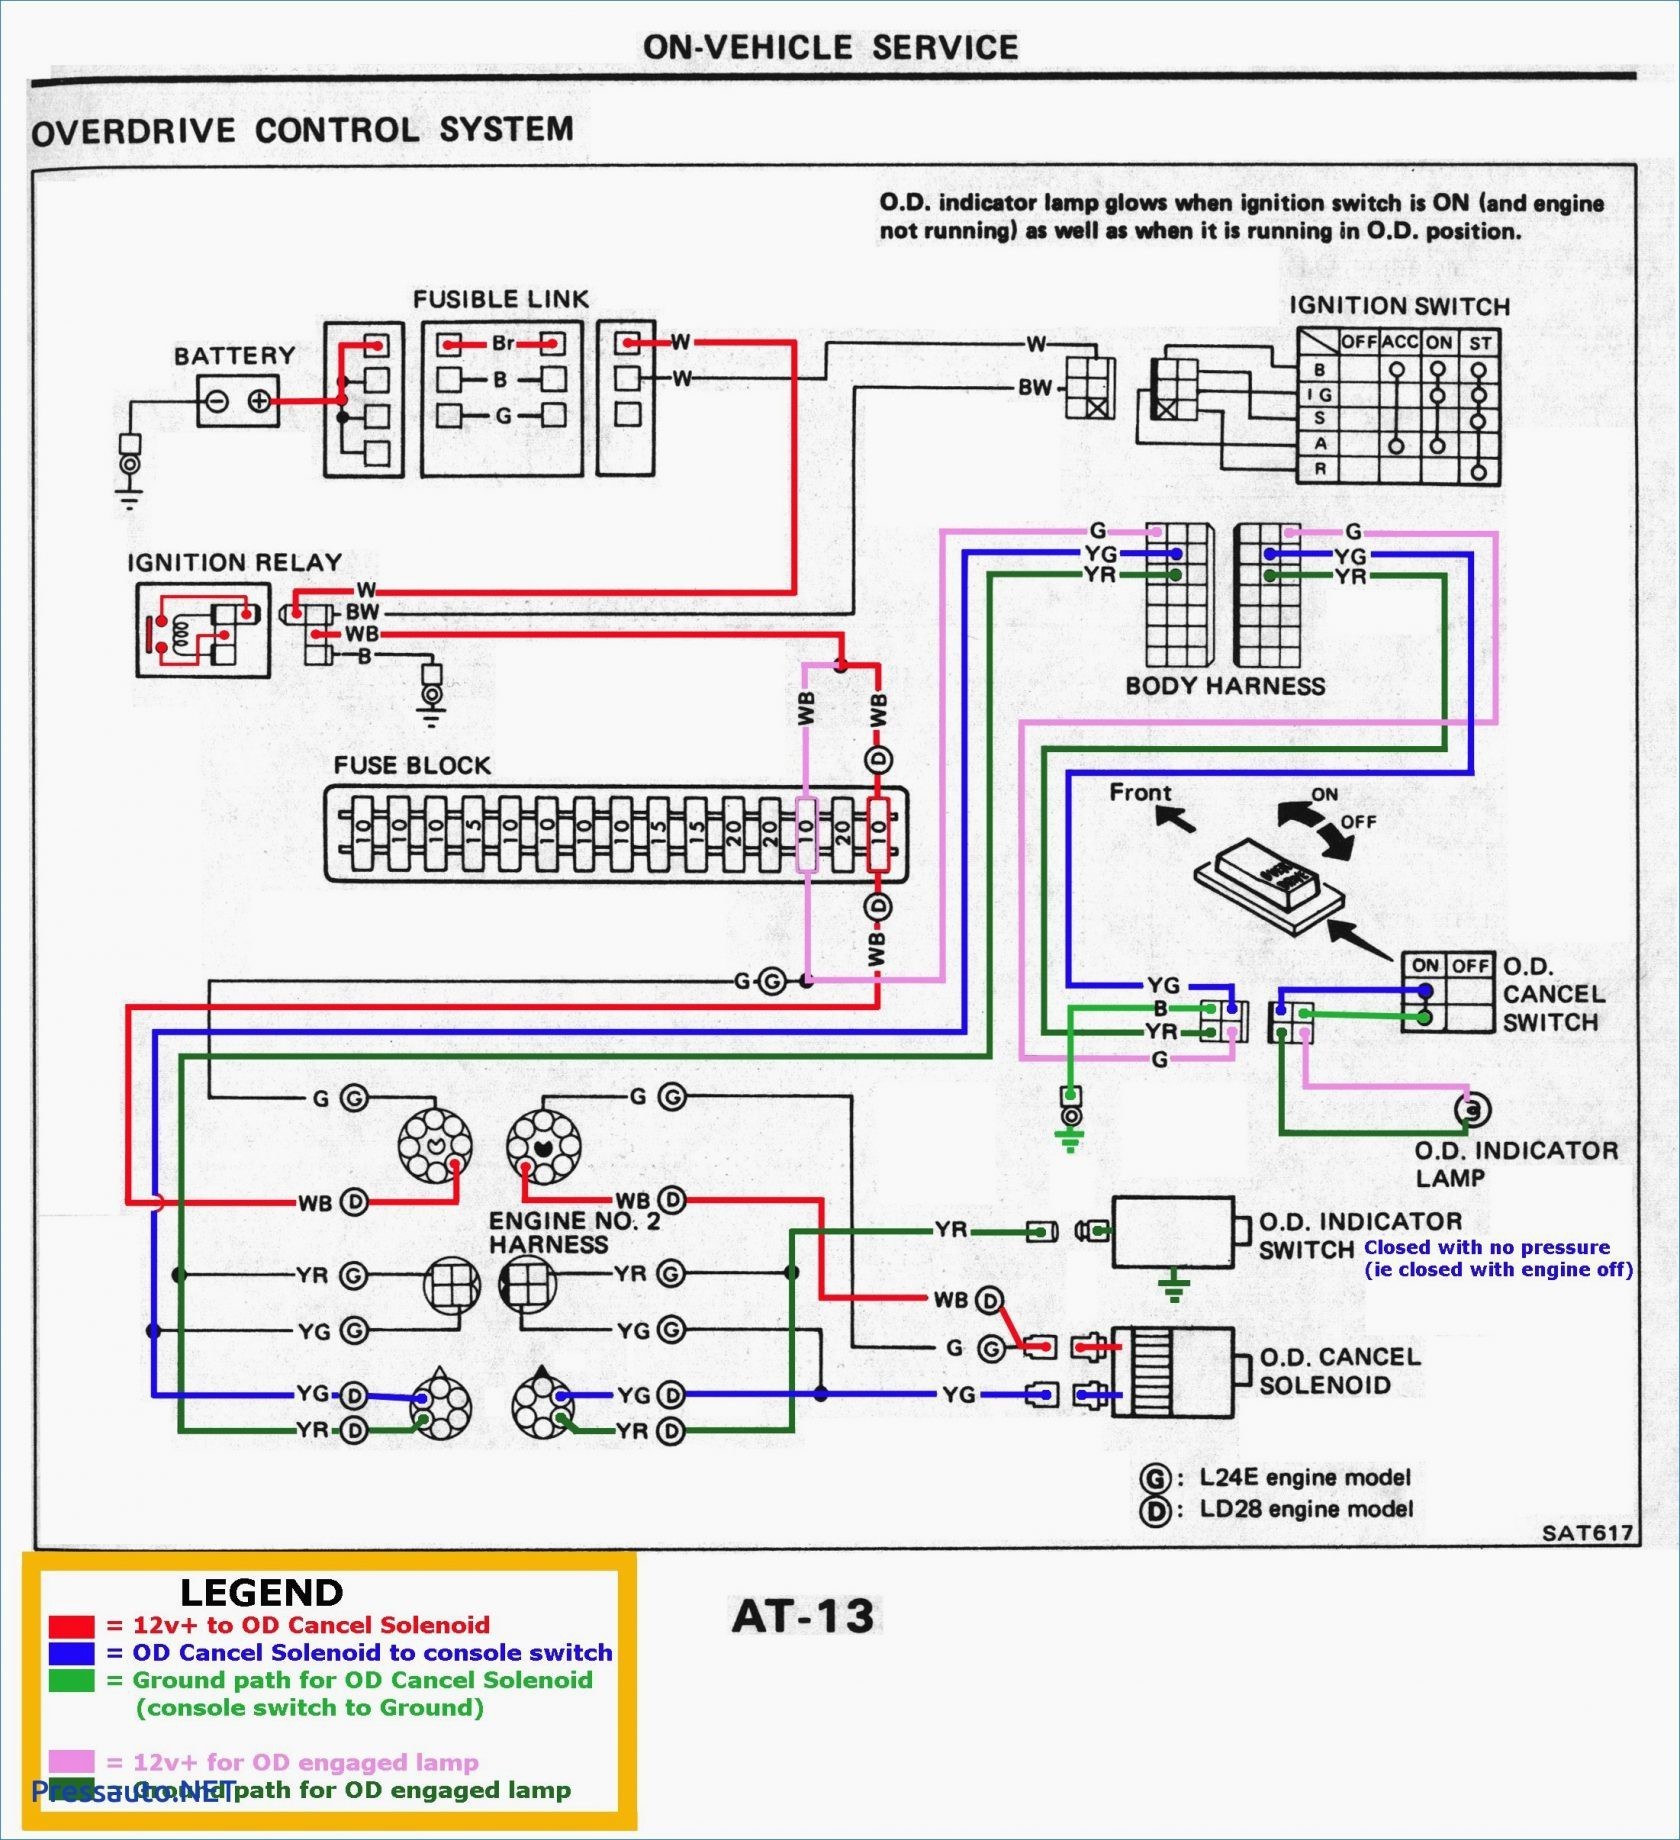 Wiring Diagram For Light And Switch Best Brake Light Switch Wiring Diagram